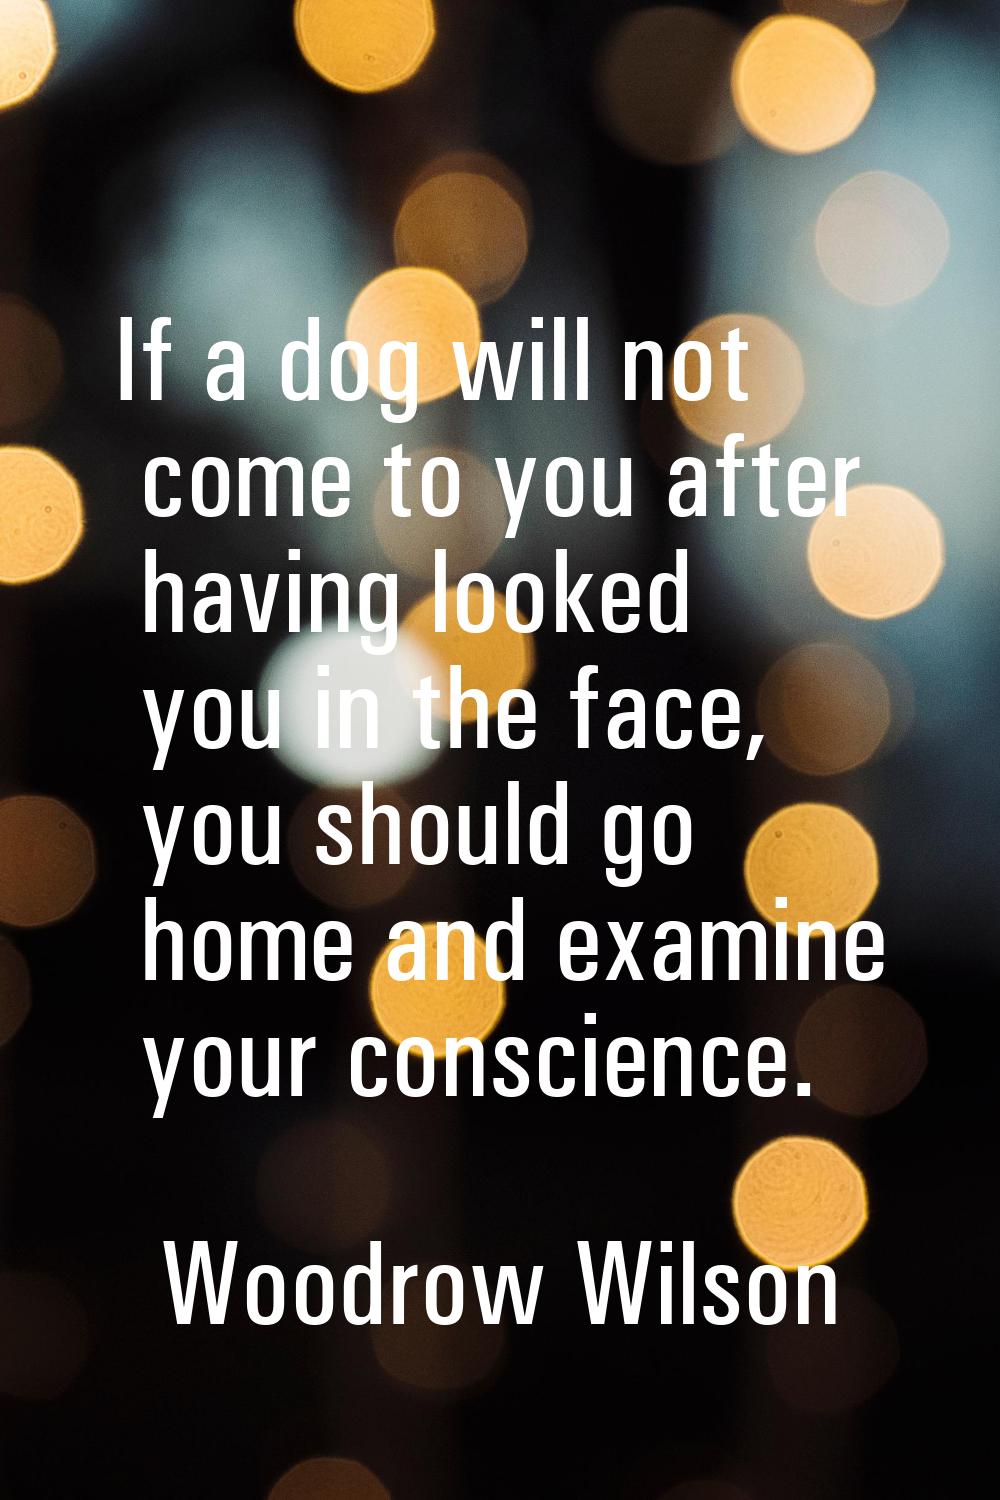 If a dog will not come to you after having looked you in the face, you should go home and examine y